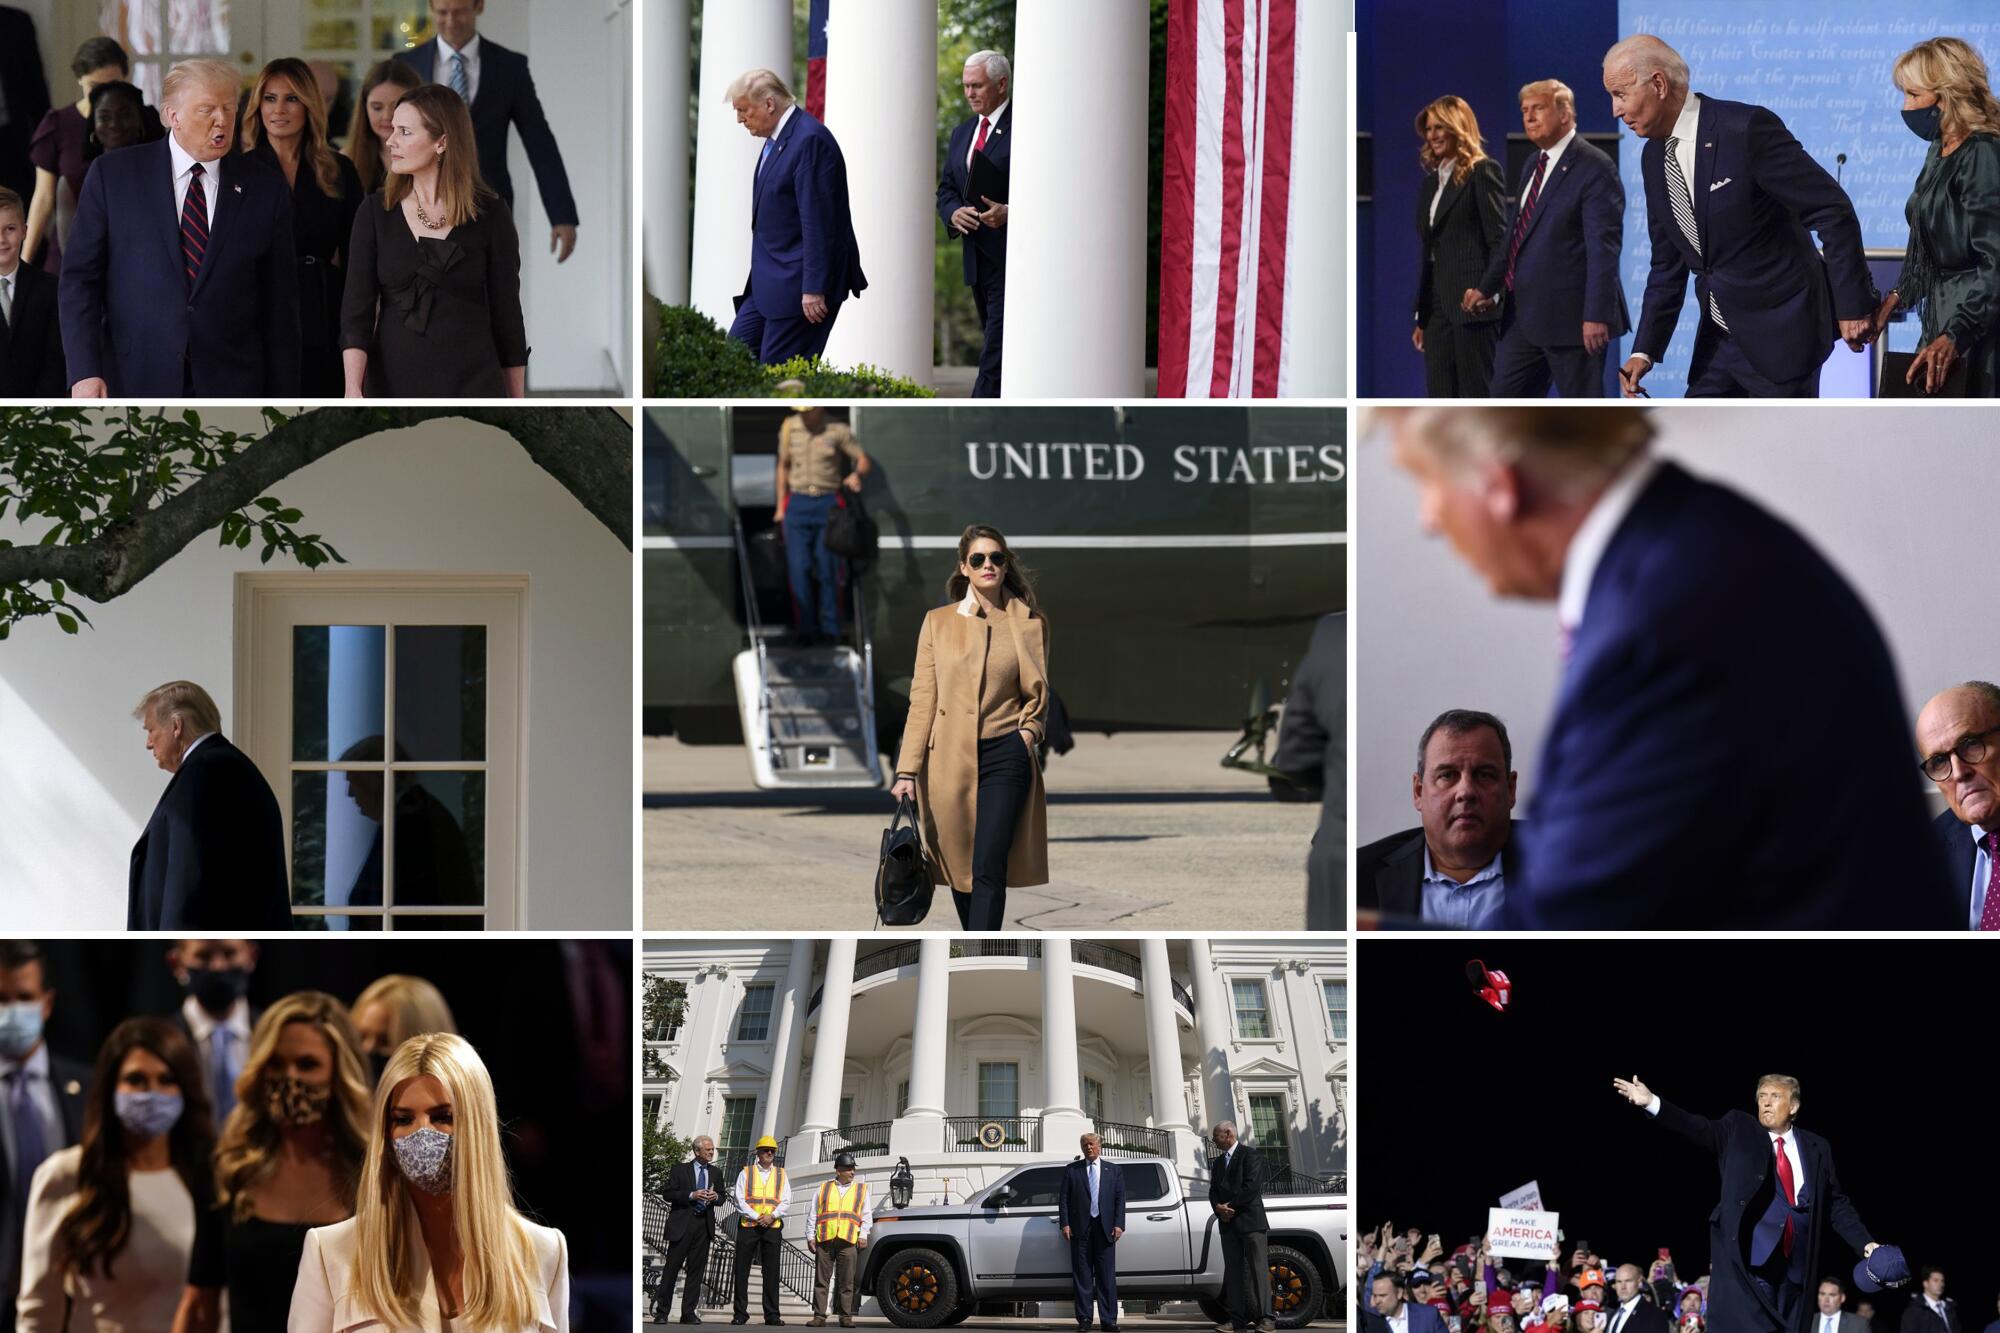 Timeline of President Trump’s appearances over the last week